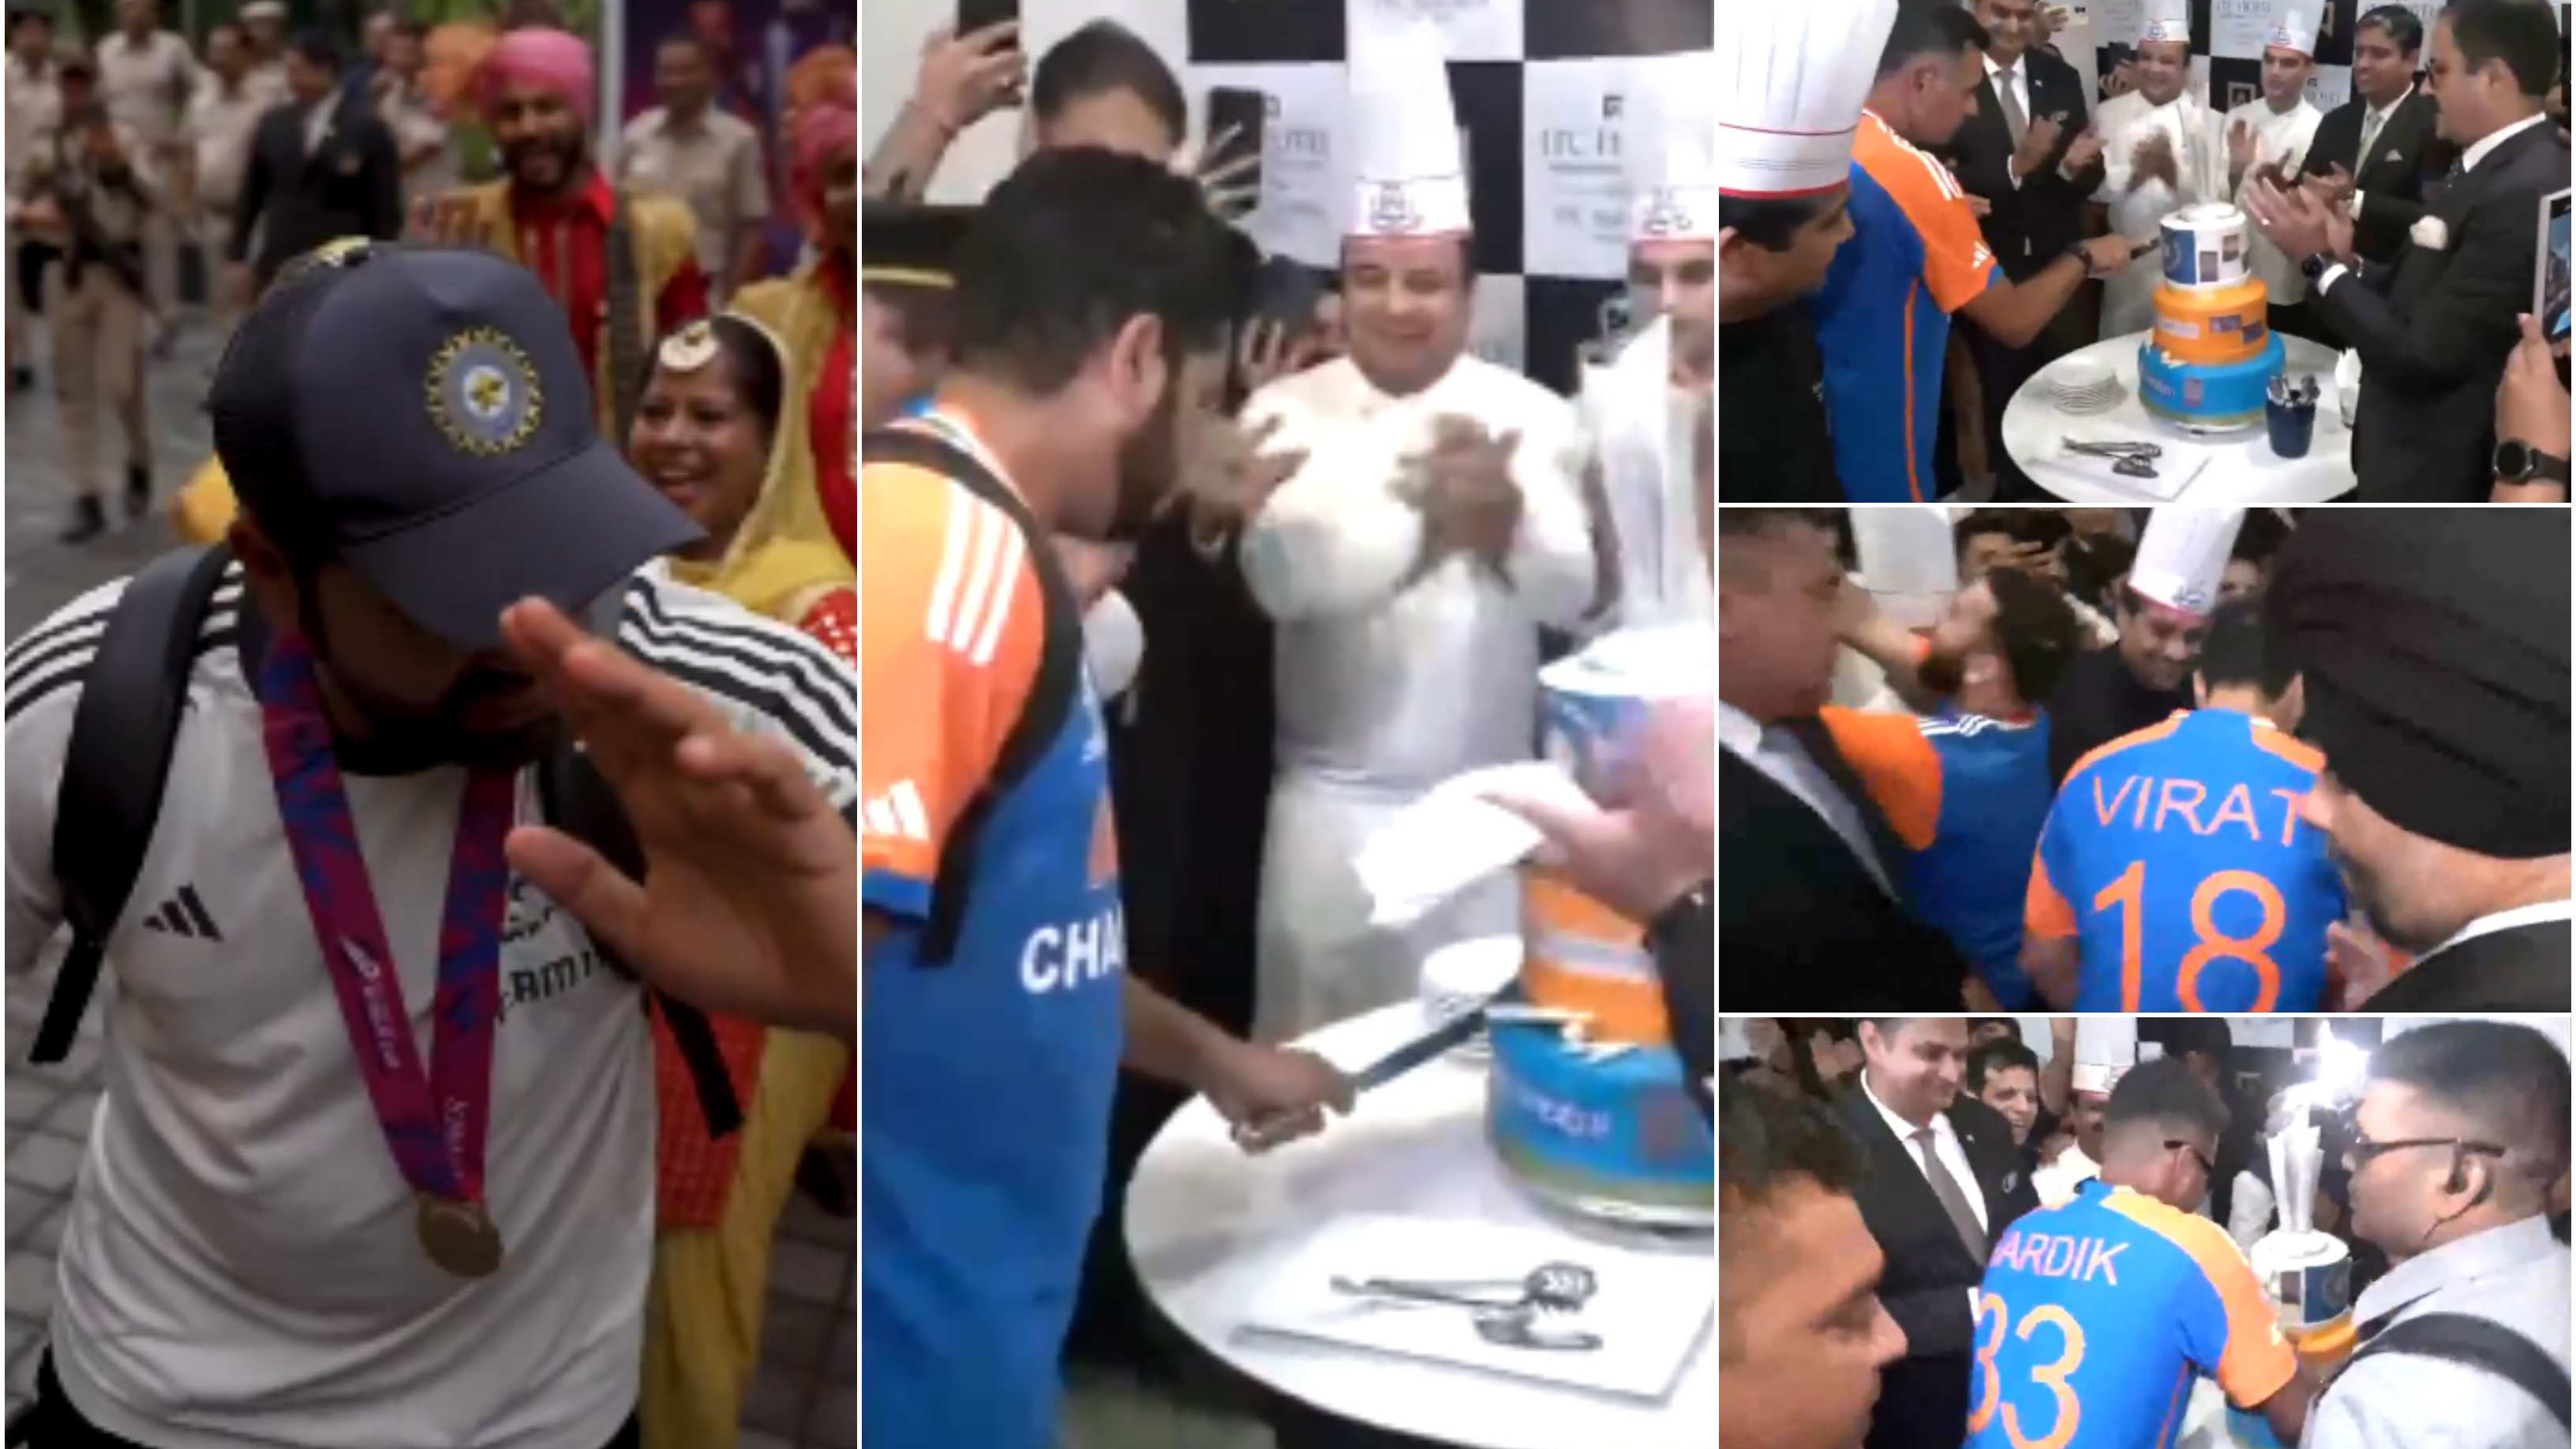 WATCH: Rohit Sharma dances on beats of Dhols after arriving at hotel in Delhi; cuts special cake along with Dravid, Kohli and Hardik